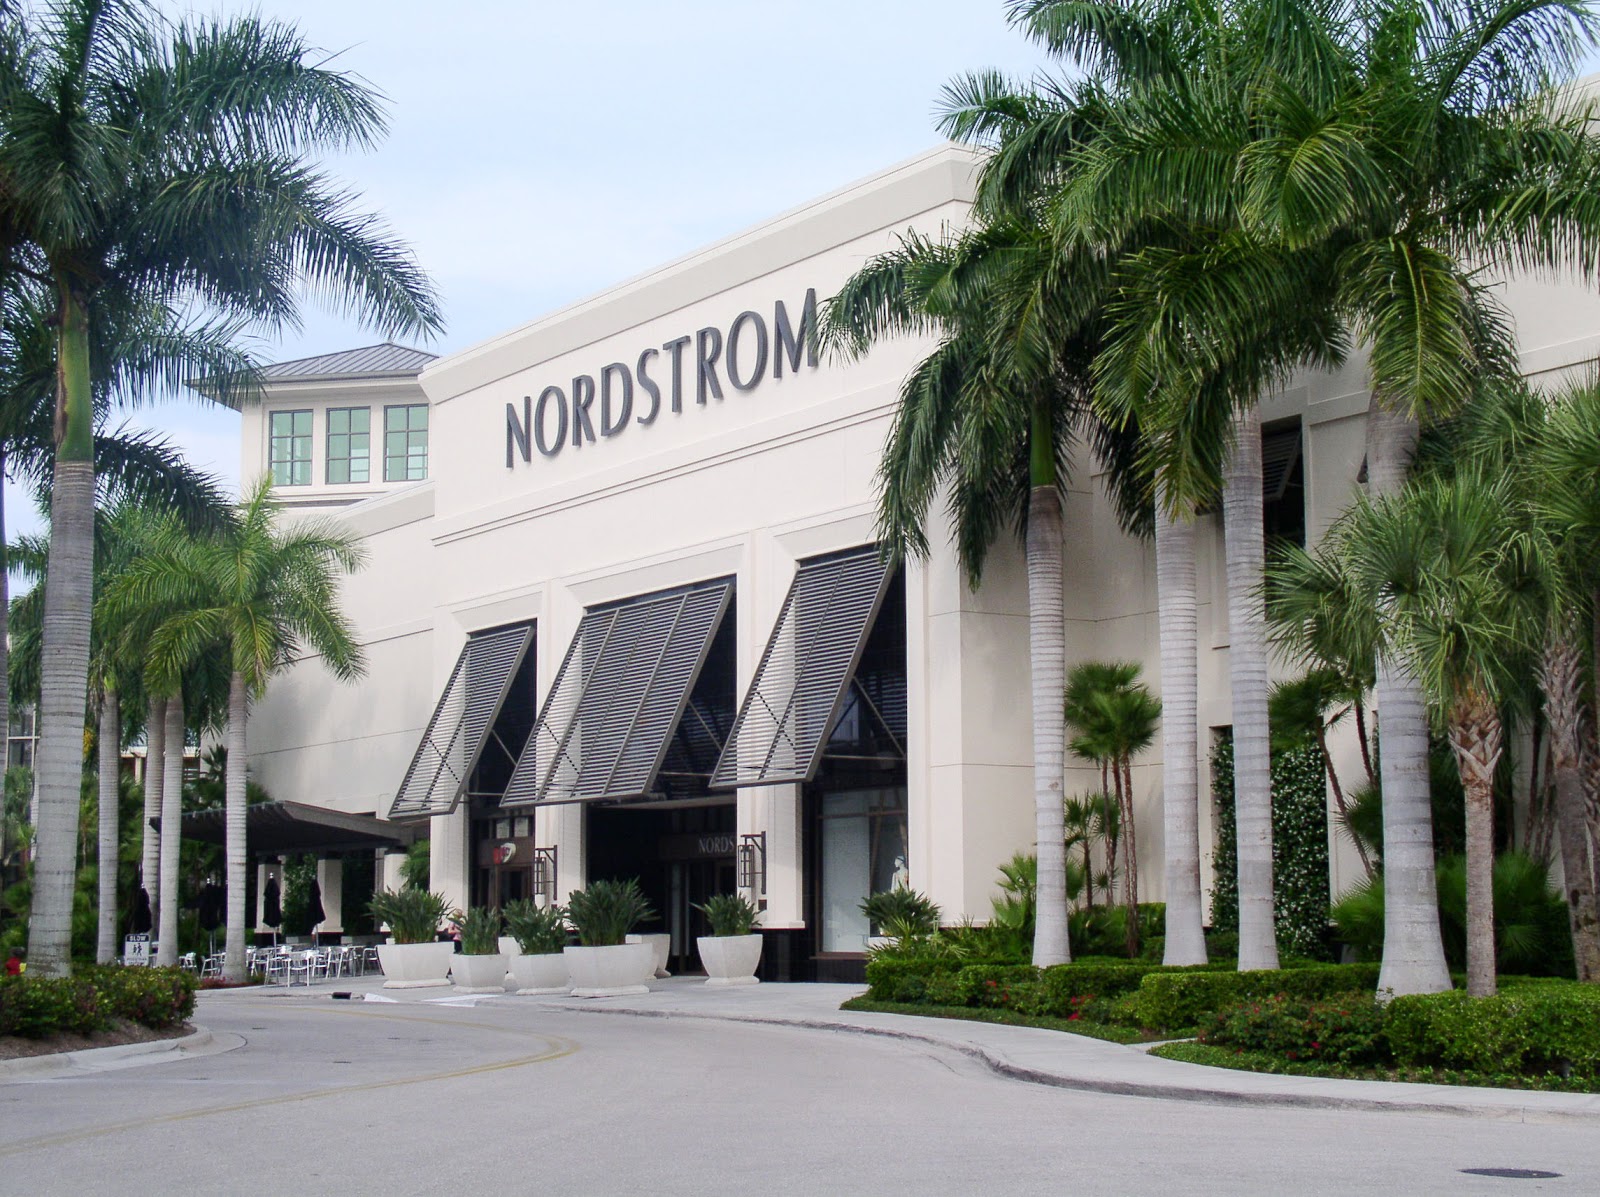 The entrance to Nordstrom at Waterside Shops in Naples, Florida